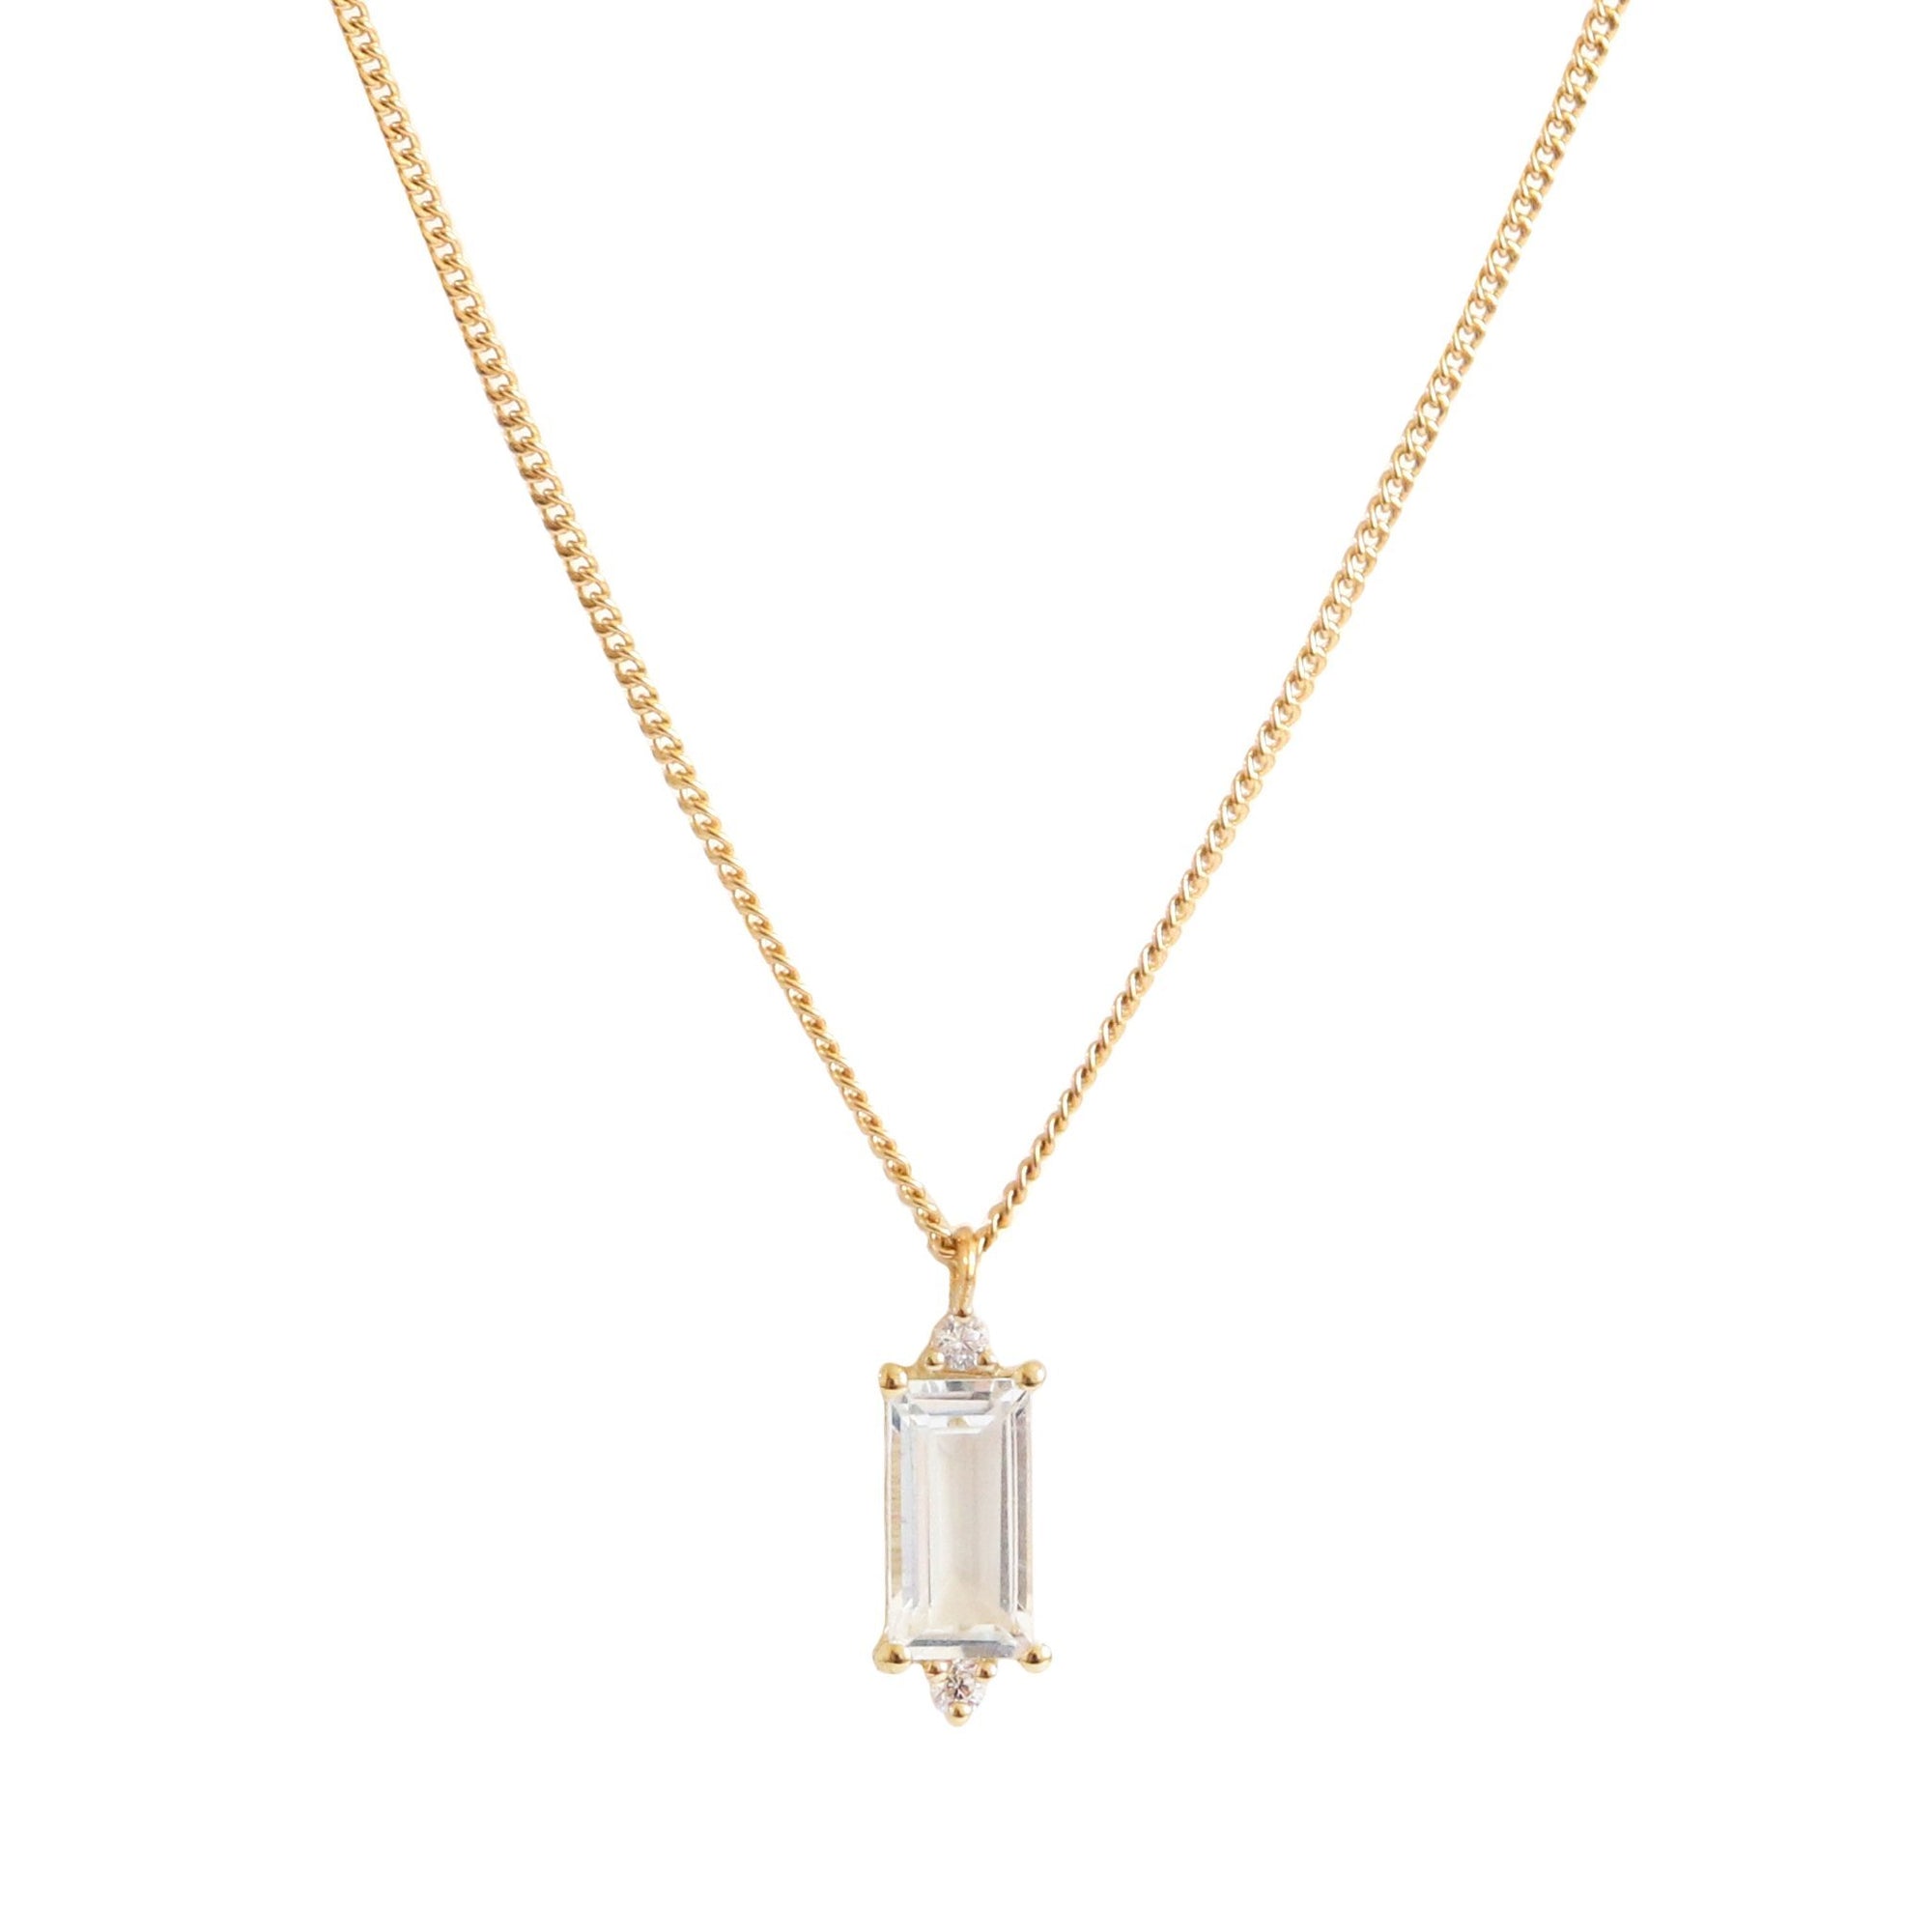 Loyal Drop Necklace - White Topaz, Cubic Zirconia & Gold - SO PRETTY CARA COTTER